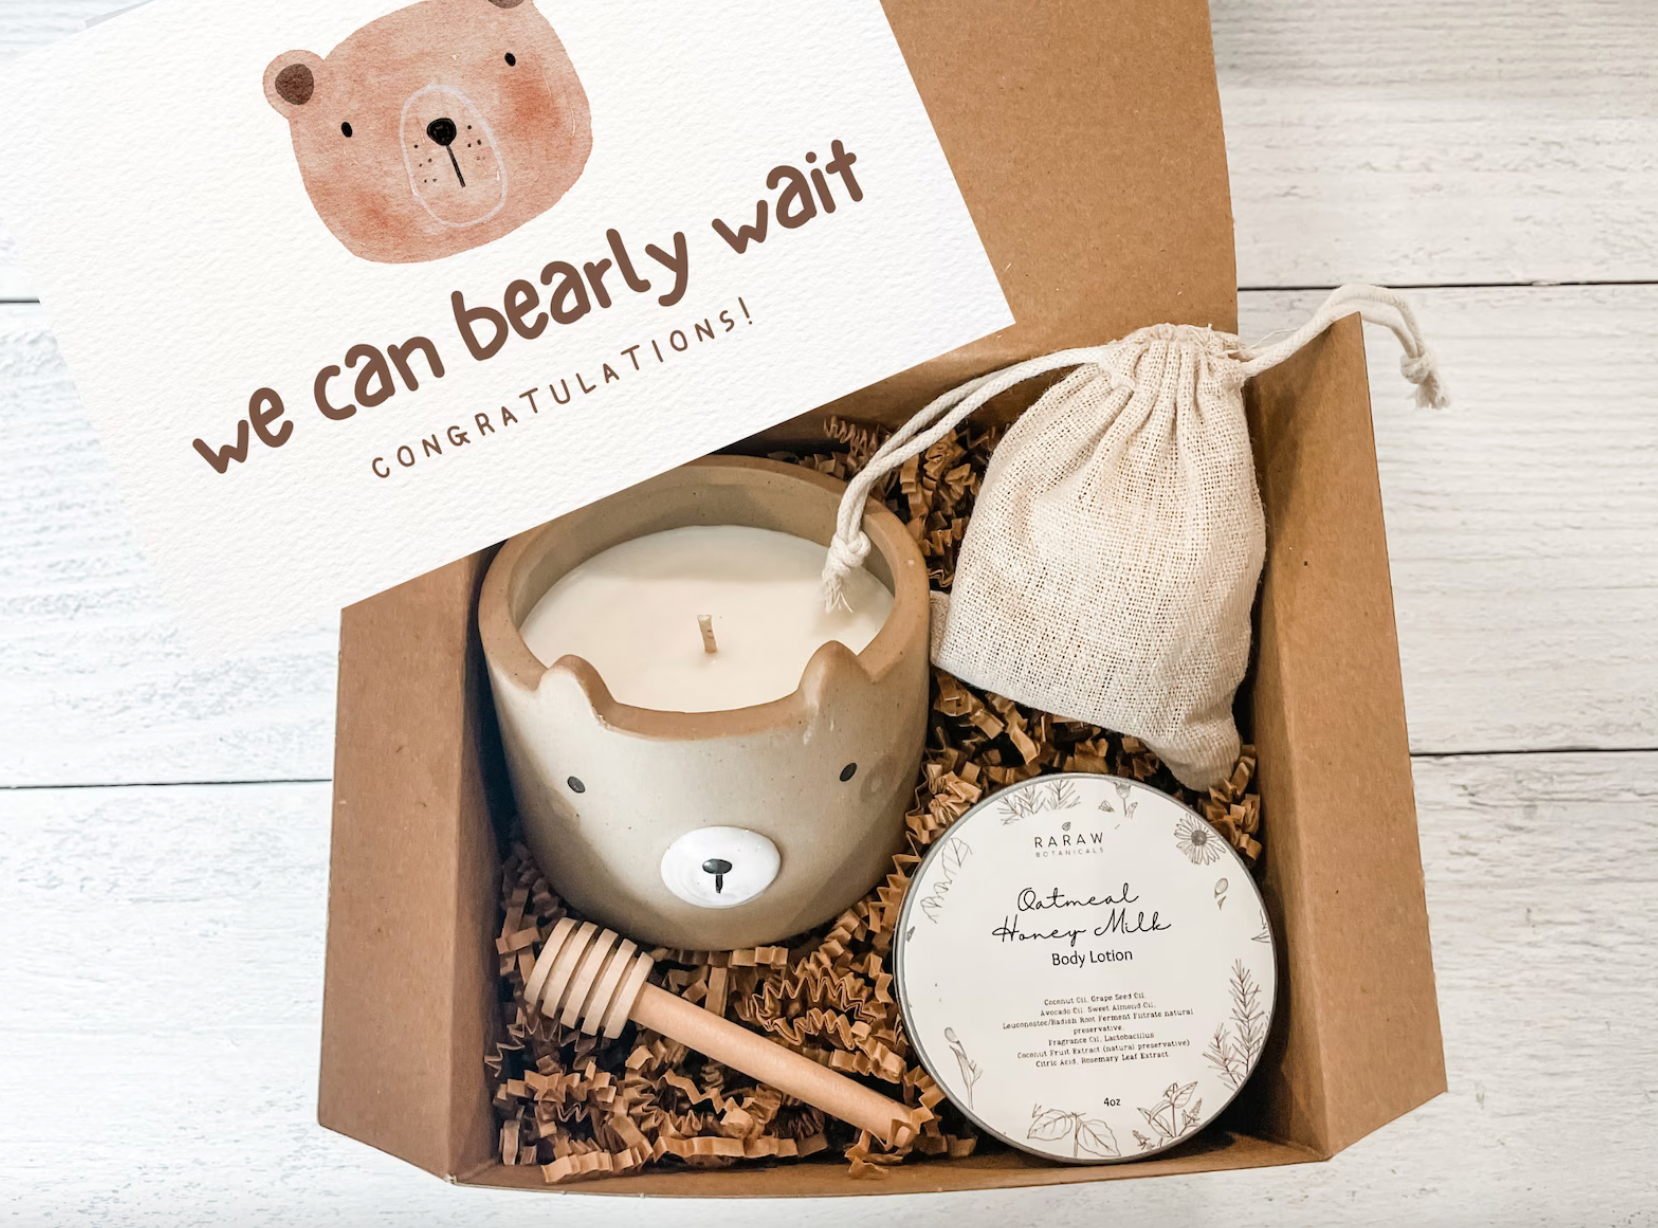 Pregnancy Congratulations Gift Box We Can Bearly Wait